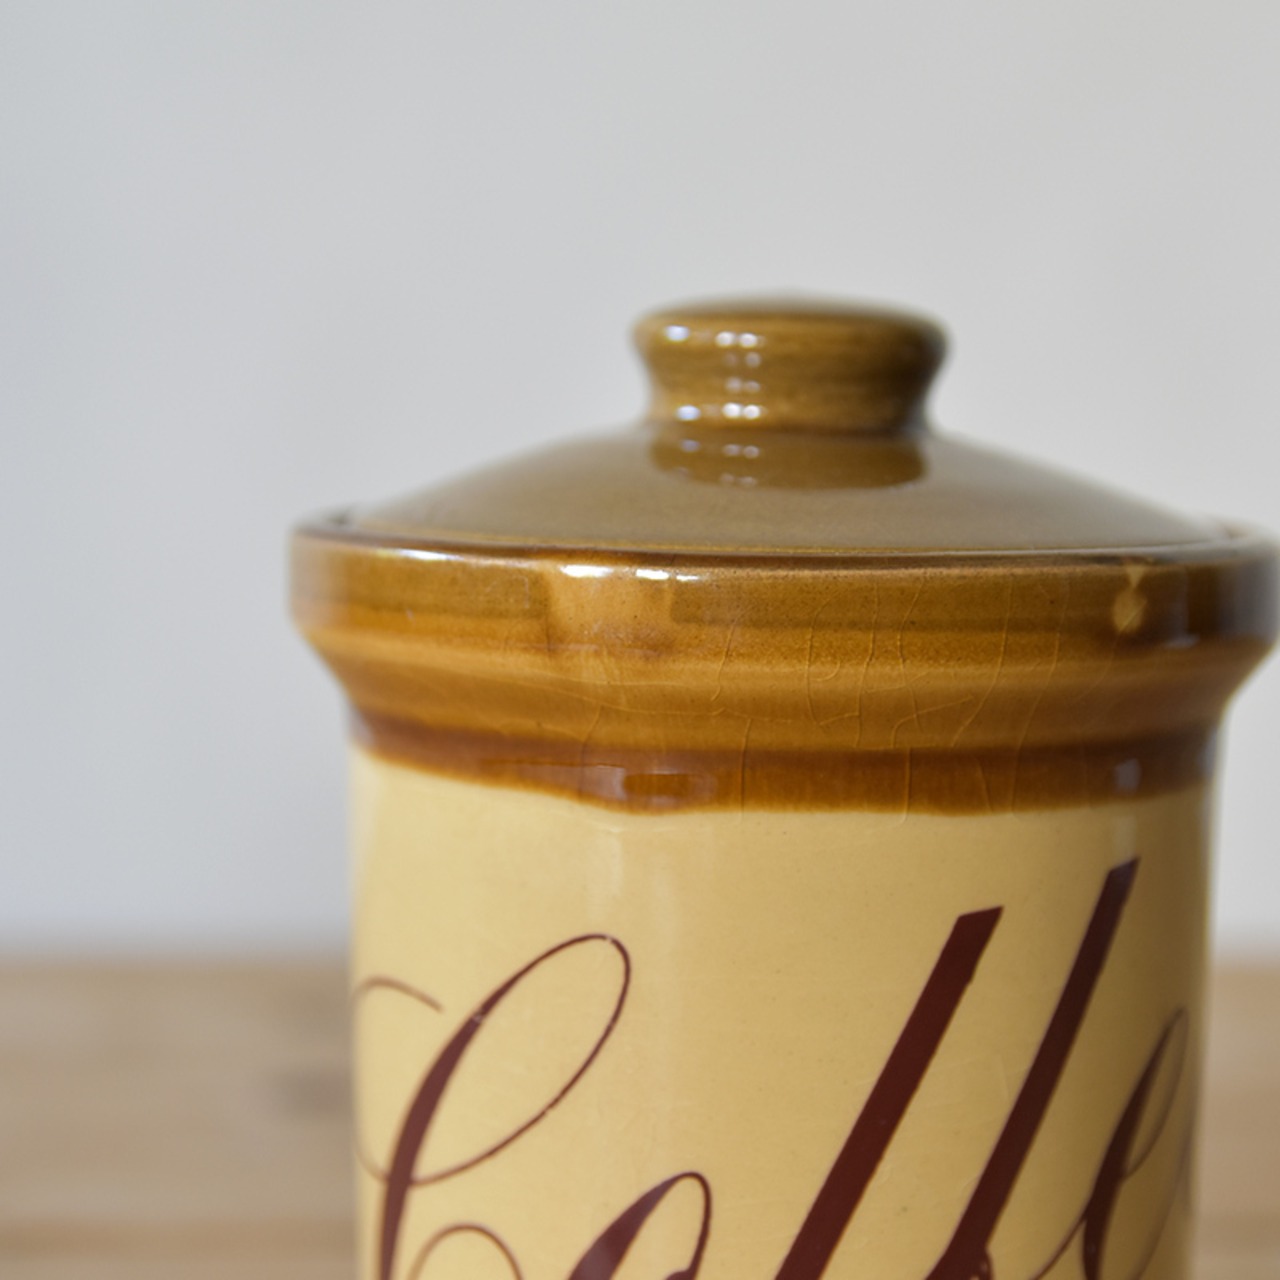 T.G.Green "Granville" Coffee Canister / グランビール コーヒー キャニスター / 2101-SLW-111563